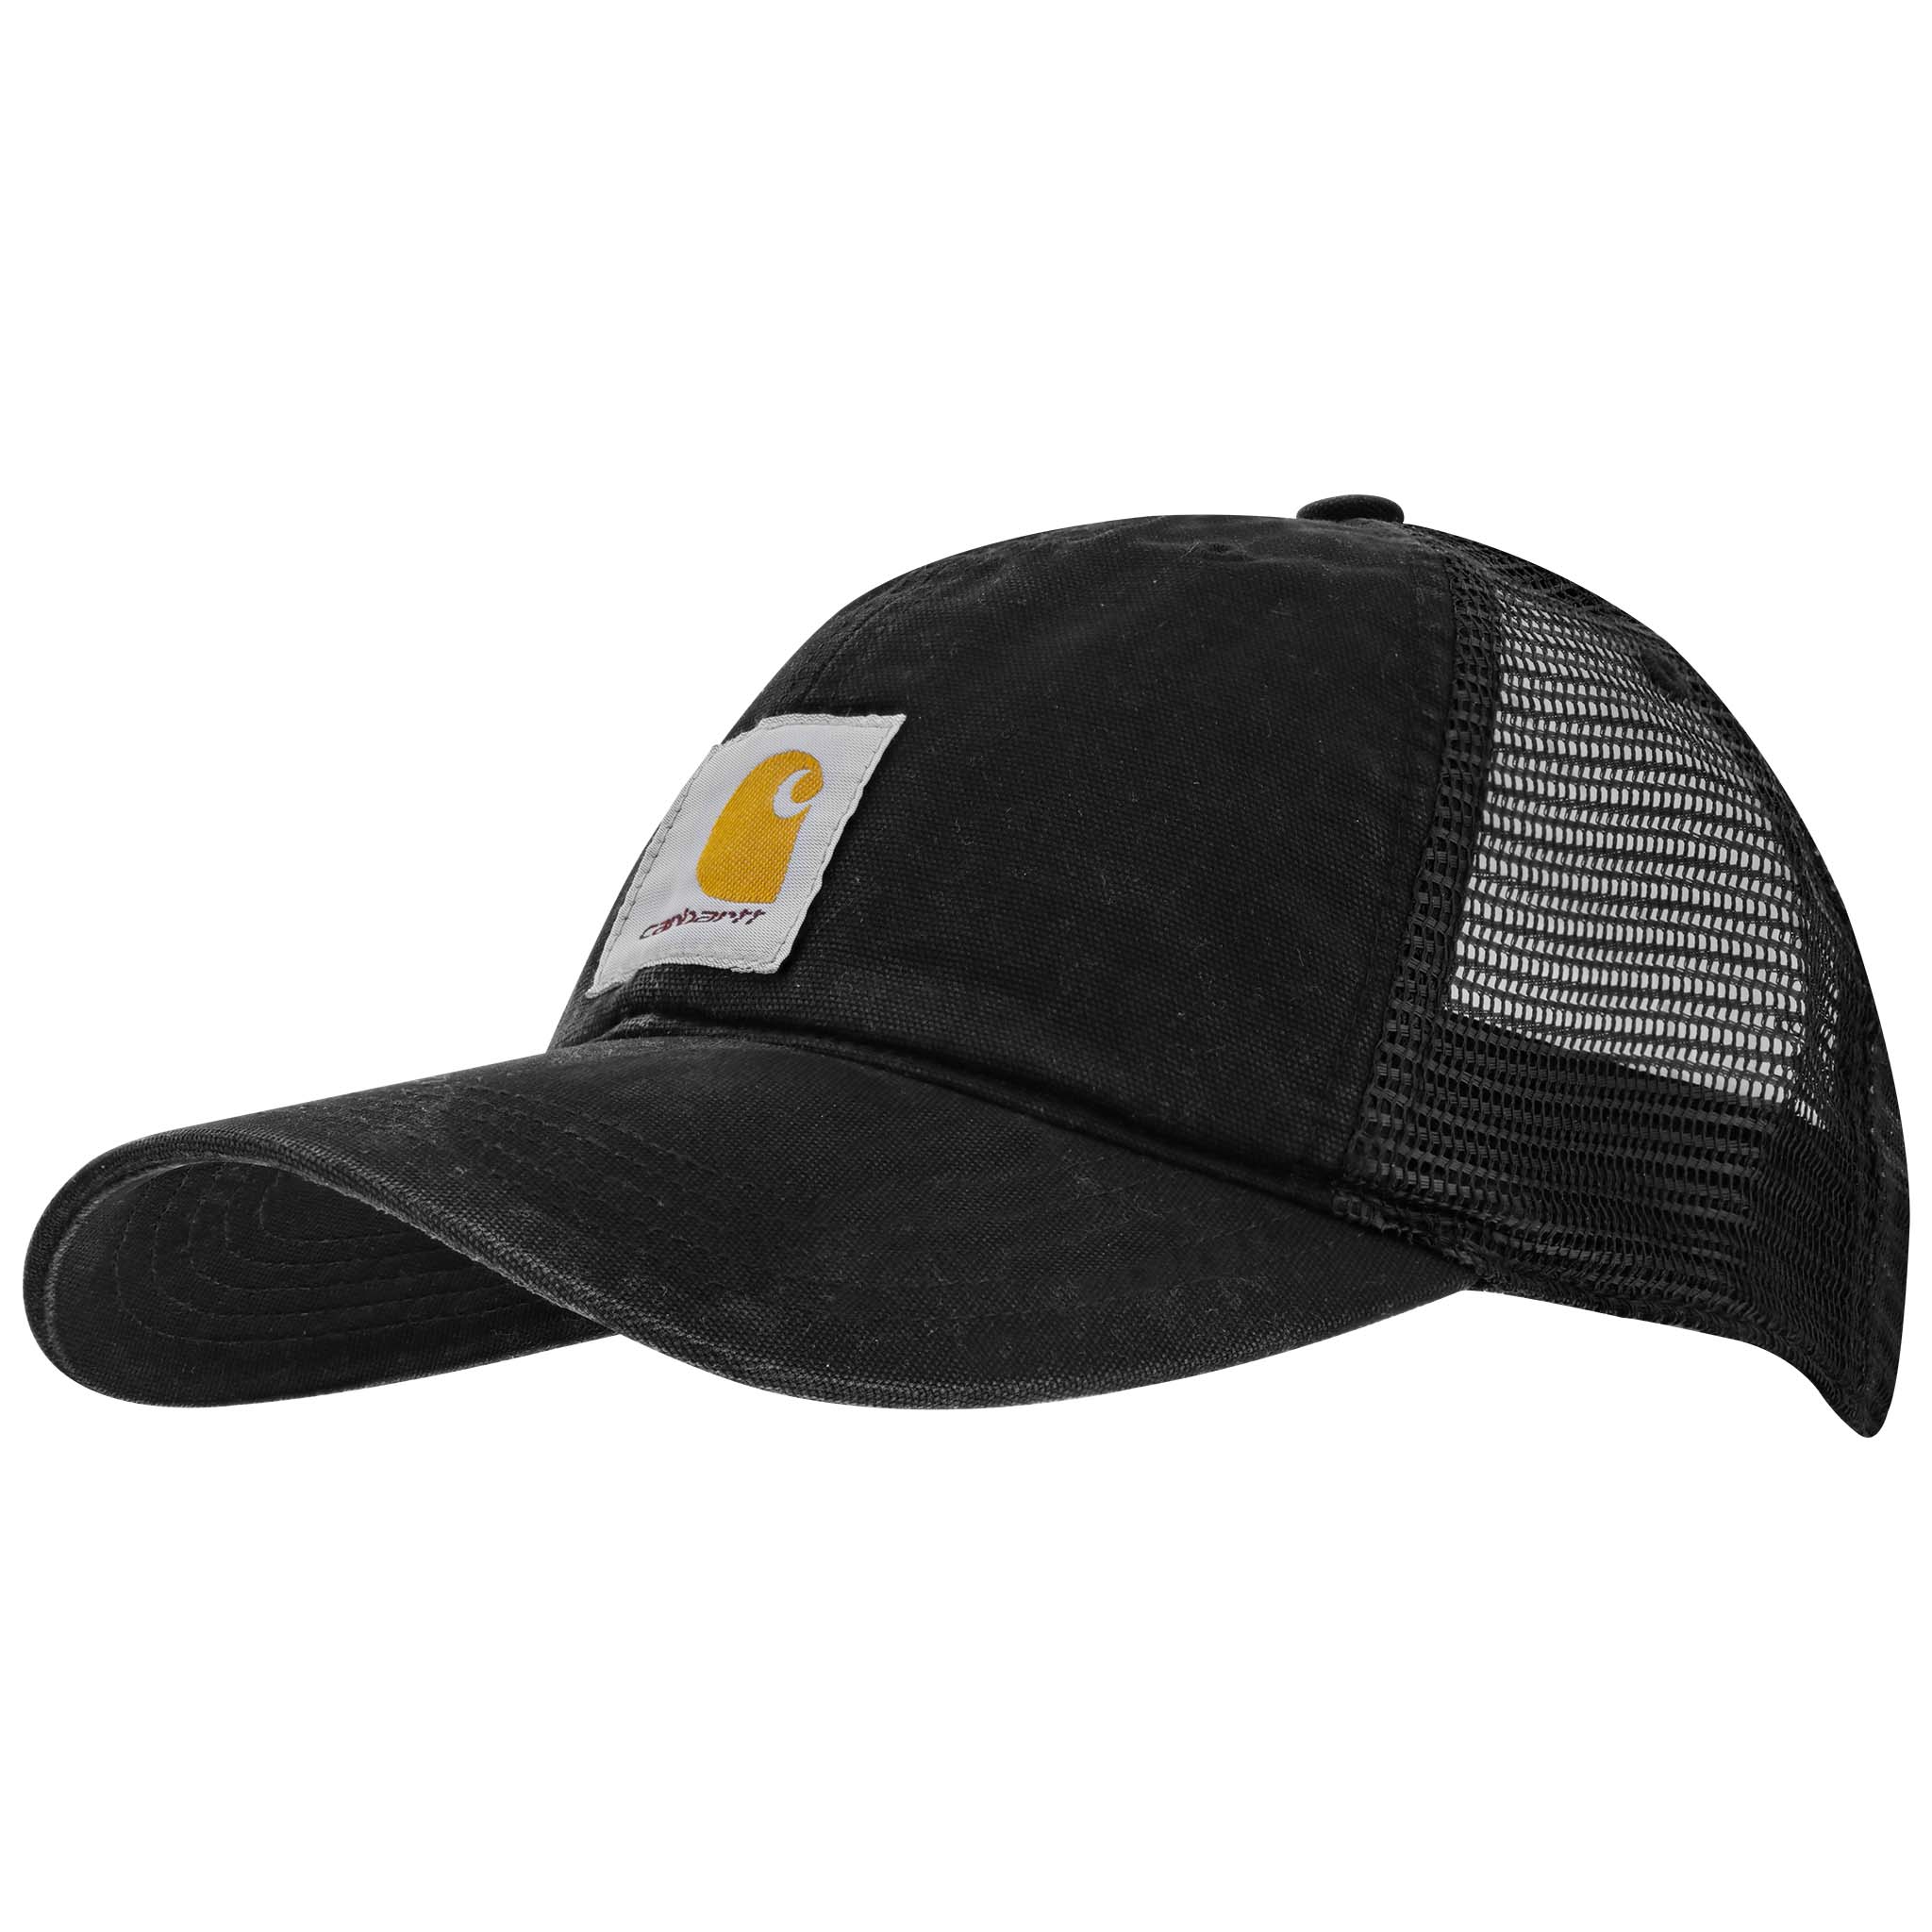 Black Canvas Back - Cap And Goods Gunthers Supply Mesh